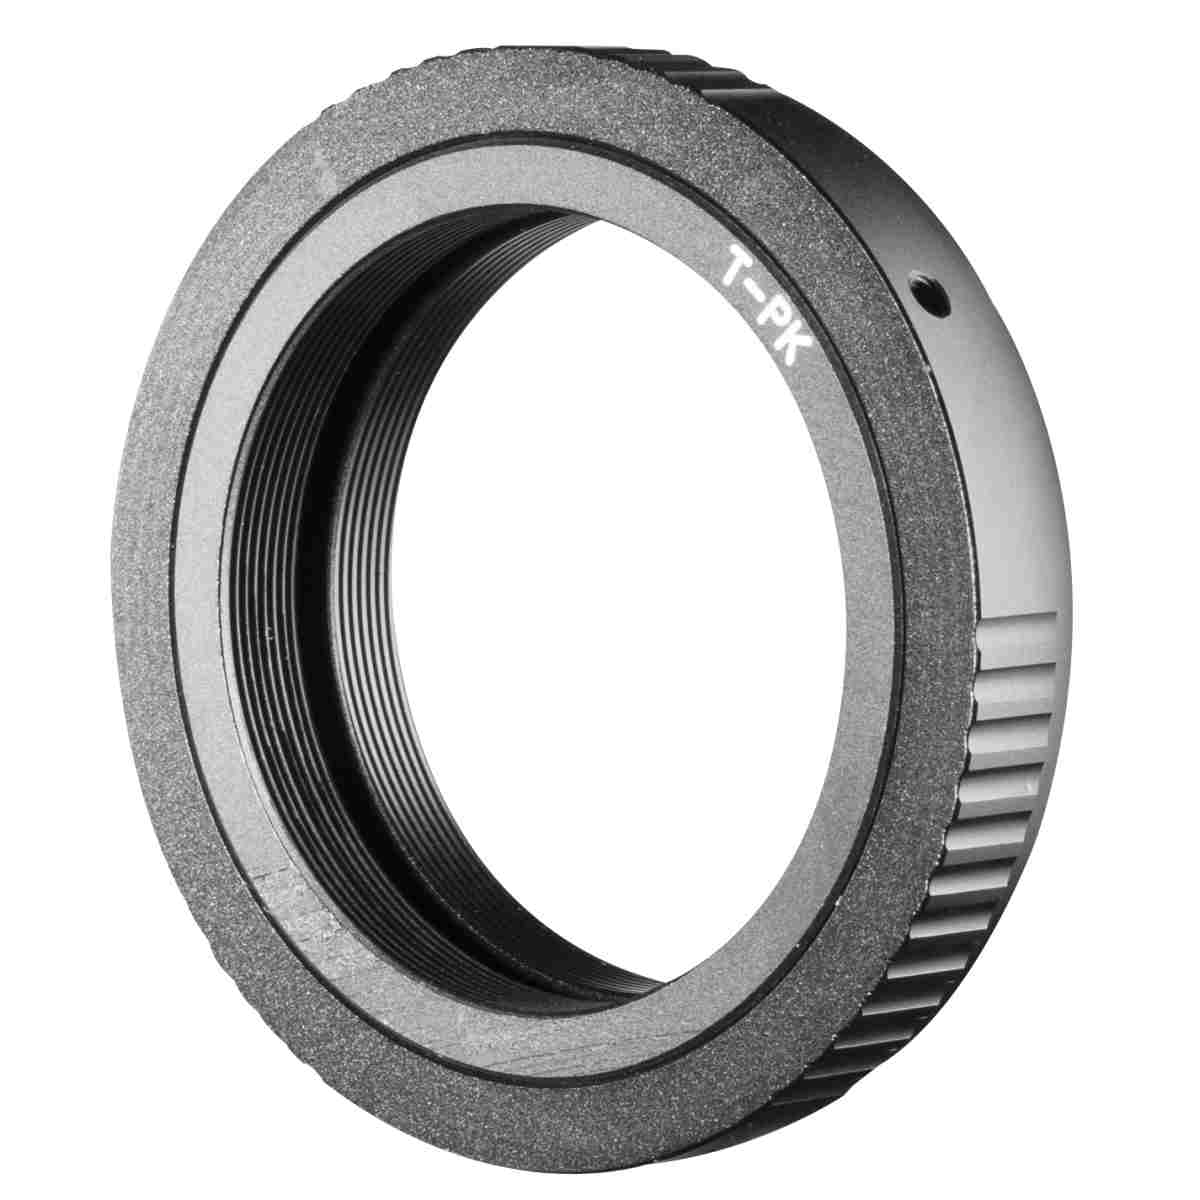 Walimex T2 Adapter for Pentax K